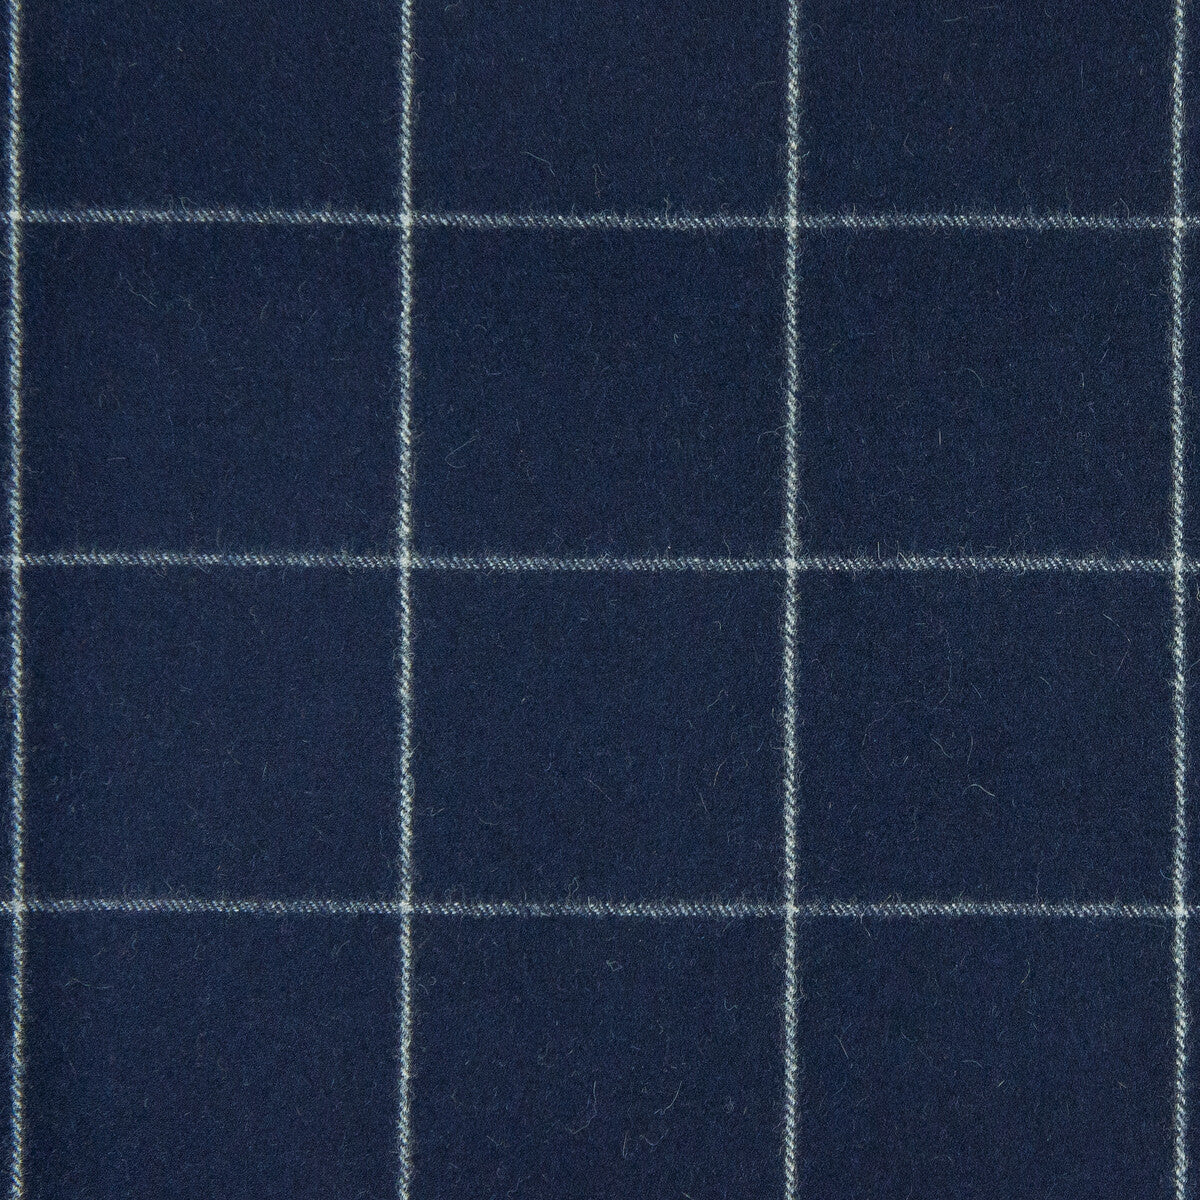 Saint Moritz fabric in navy color - pattern GDT5584.001.0 - by Gaston y Daniela in the Gaston Luis Bustamante collection